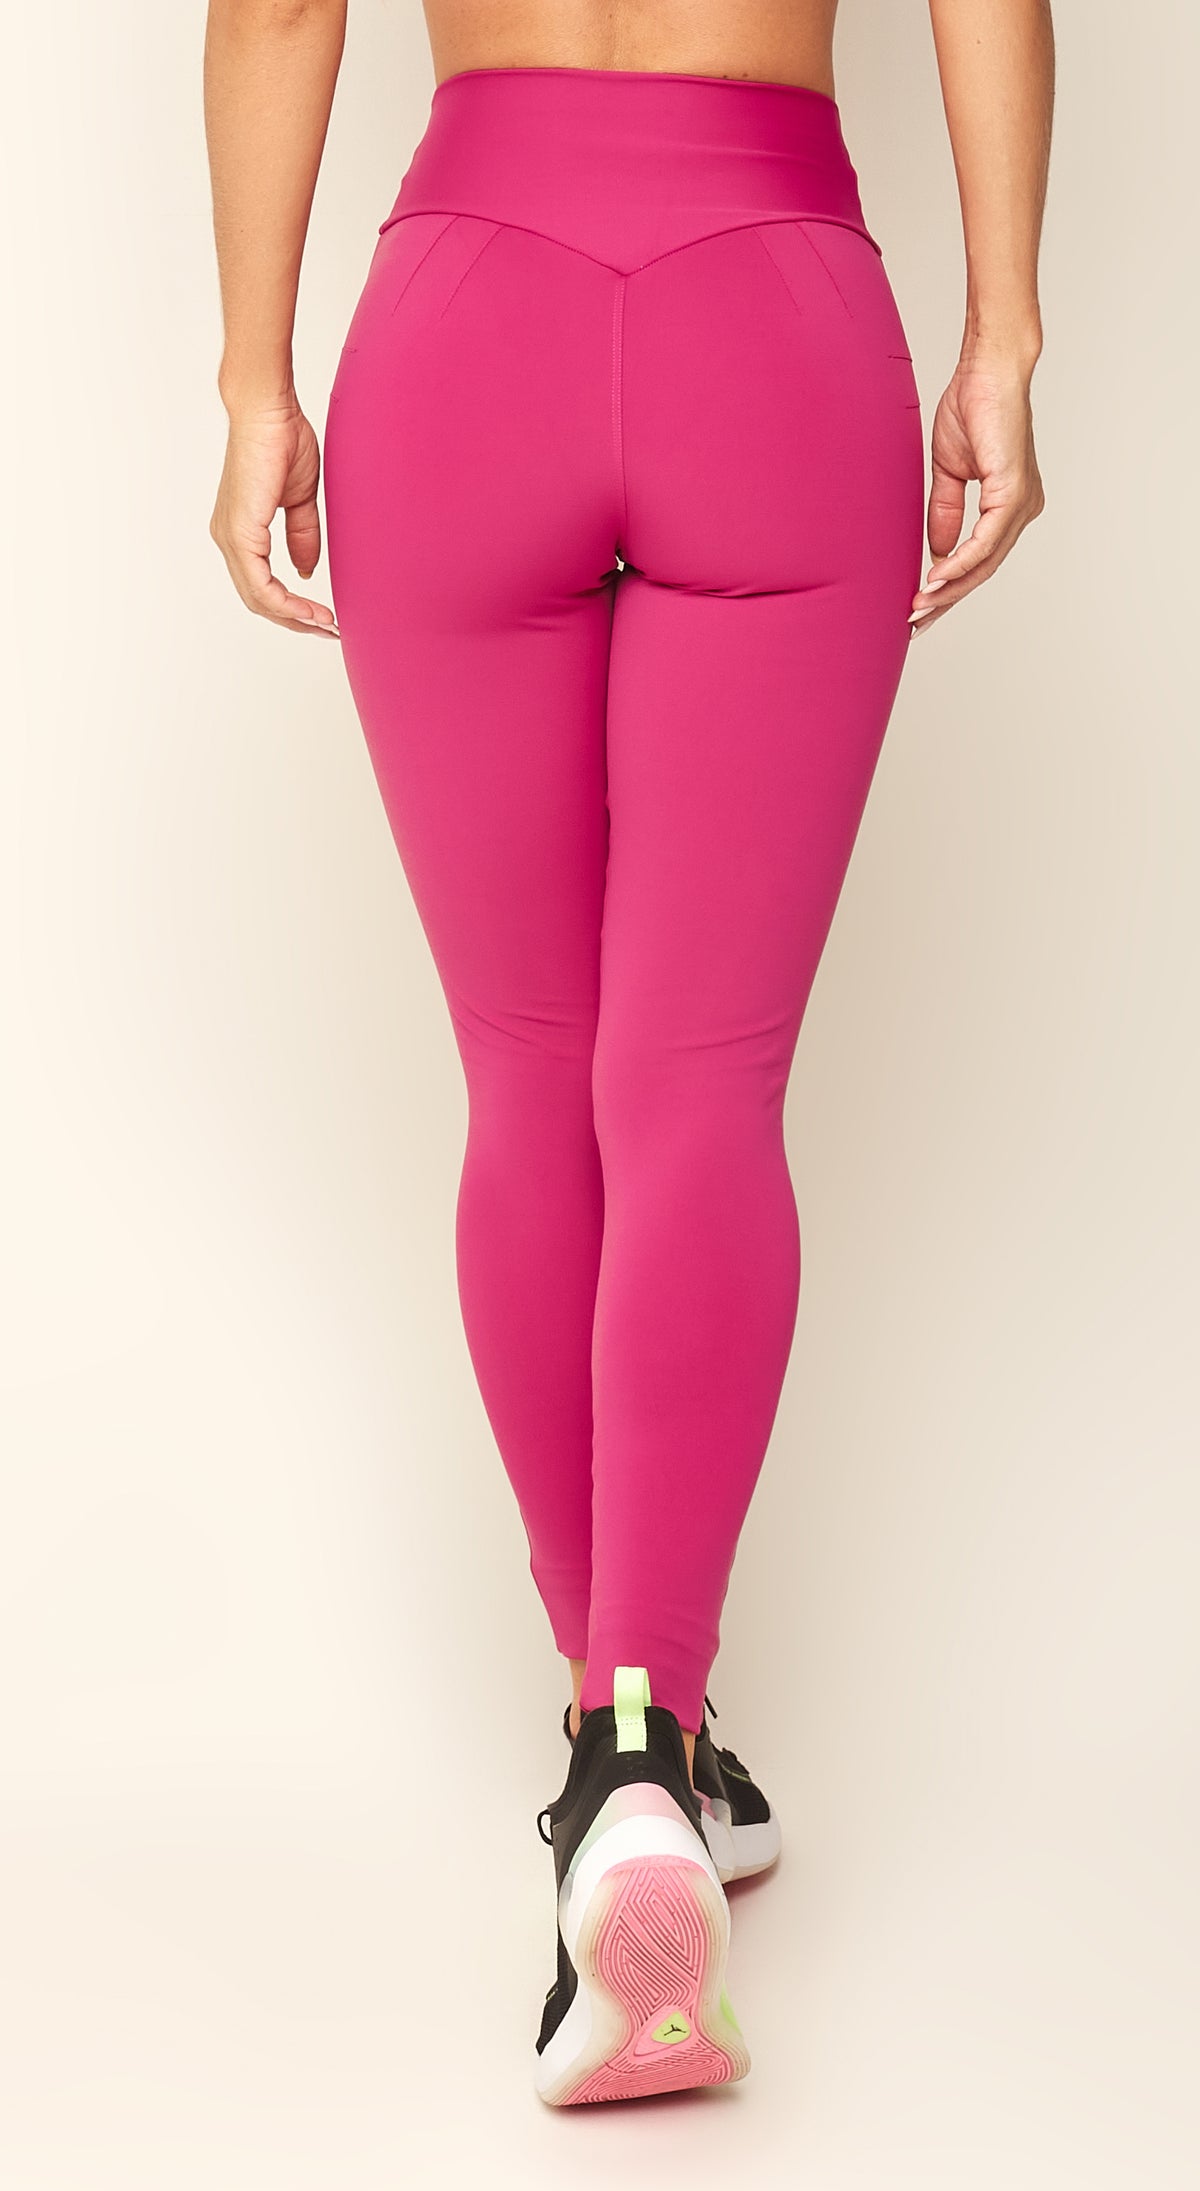 Solid Colors Legging - Pink